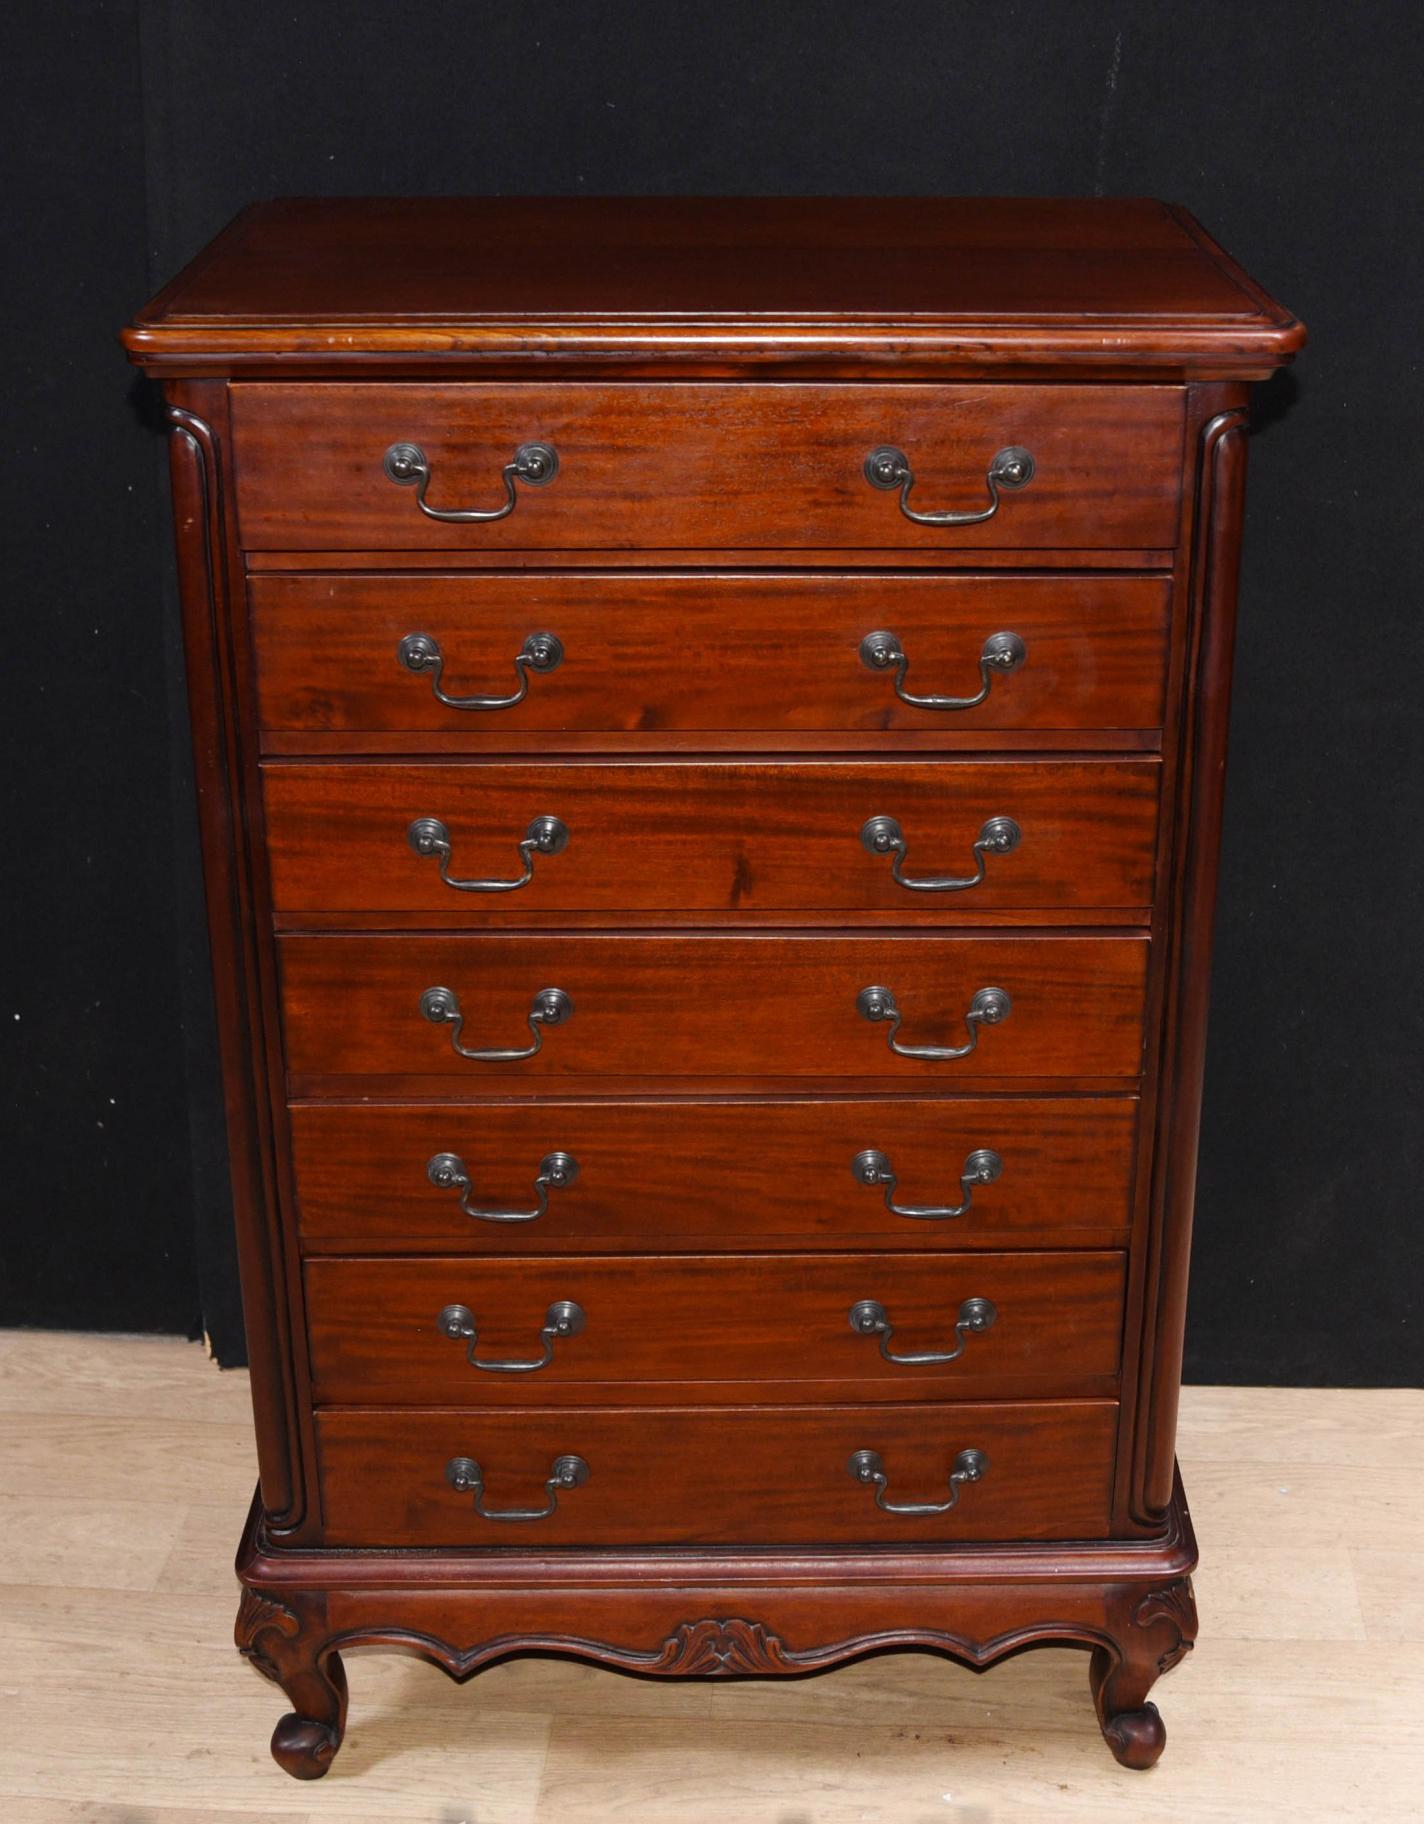 - Gorgeous Wellington chest of drawers in mahogany.
- We date this wonderful antique desk to circa 1890.
- Ample storage with.
- Viewings available by appointment.
- Offered in great shape ready for home use right away.